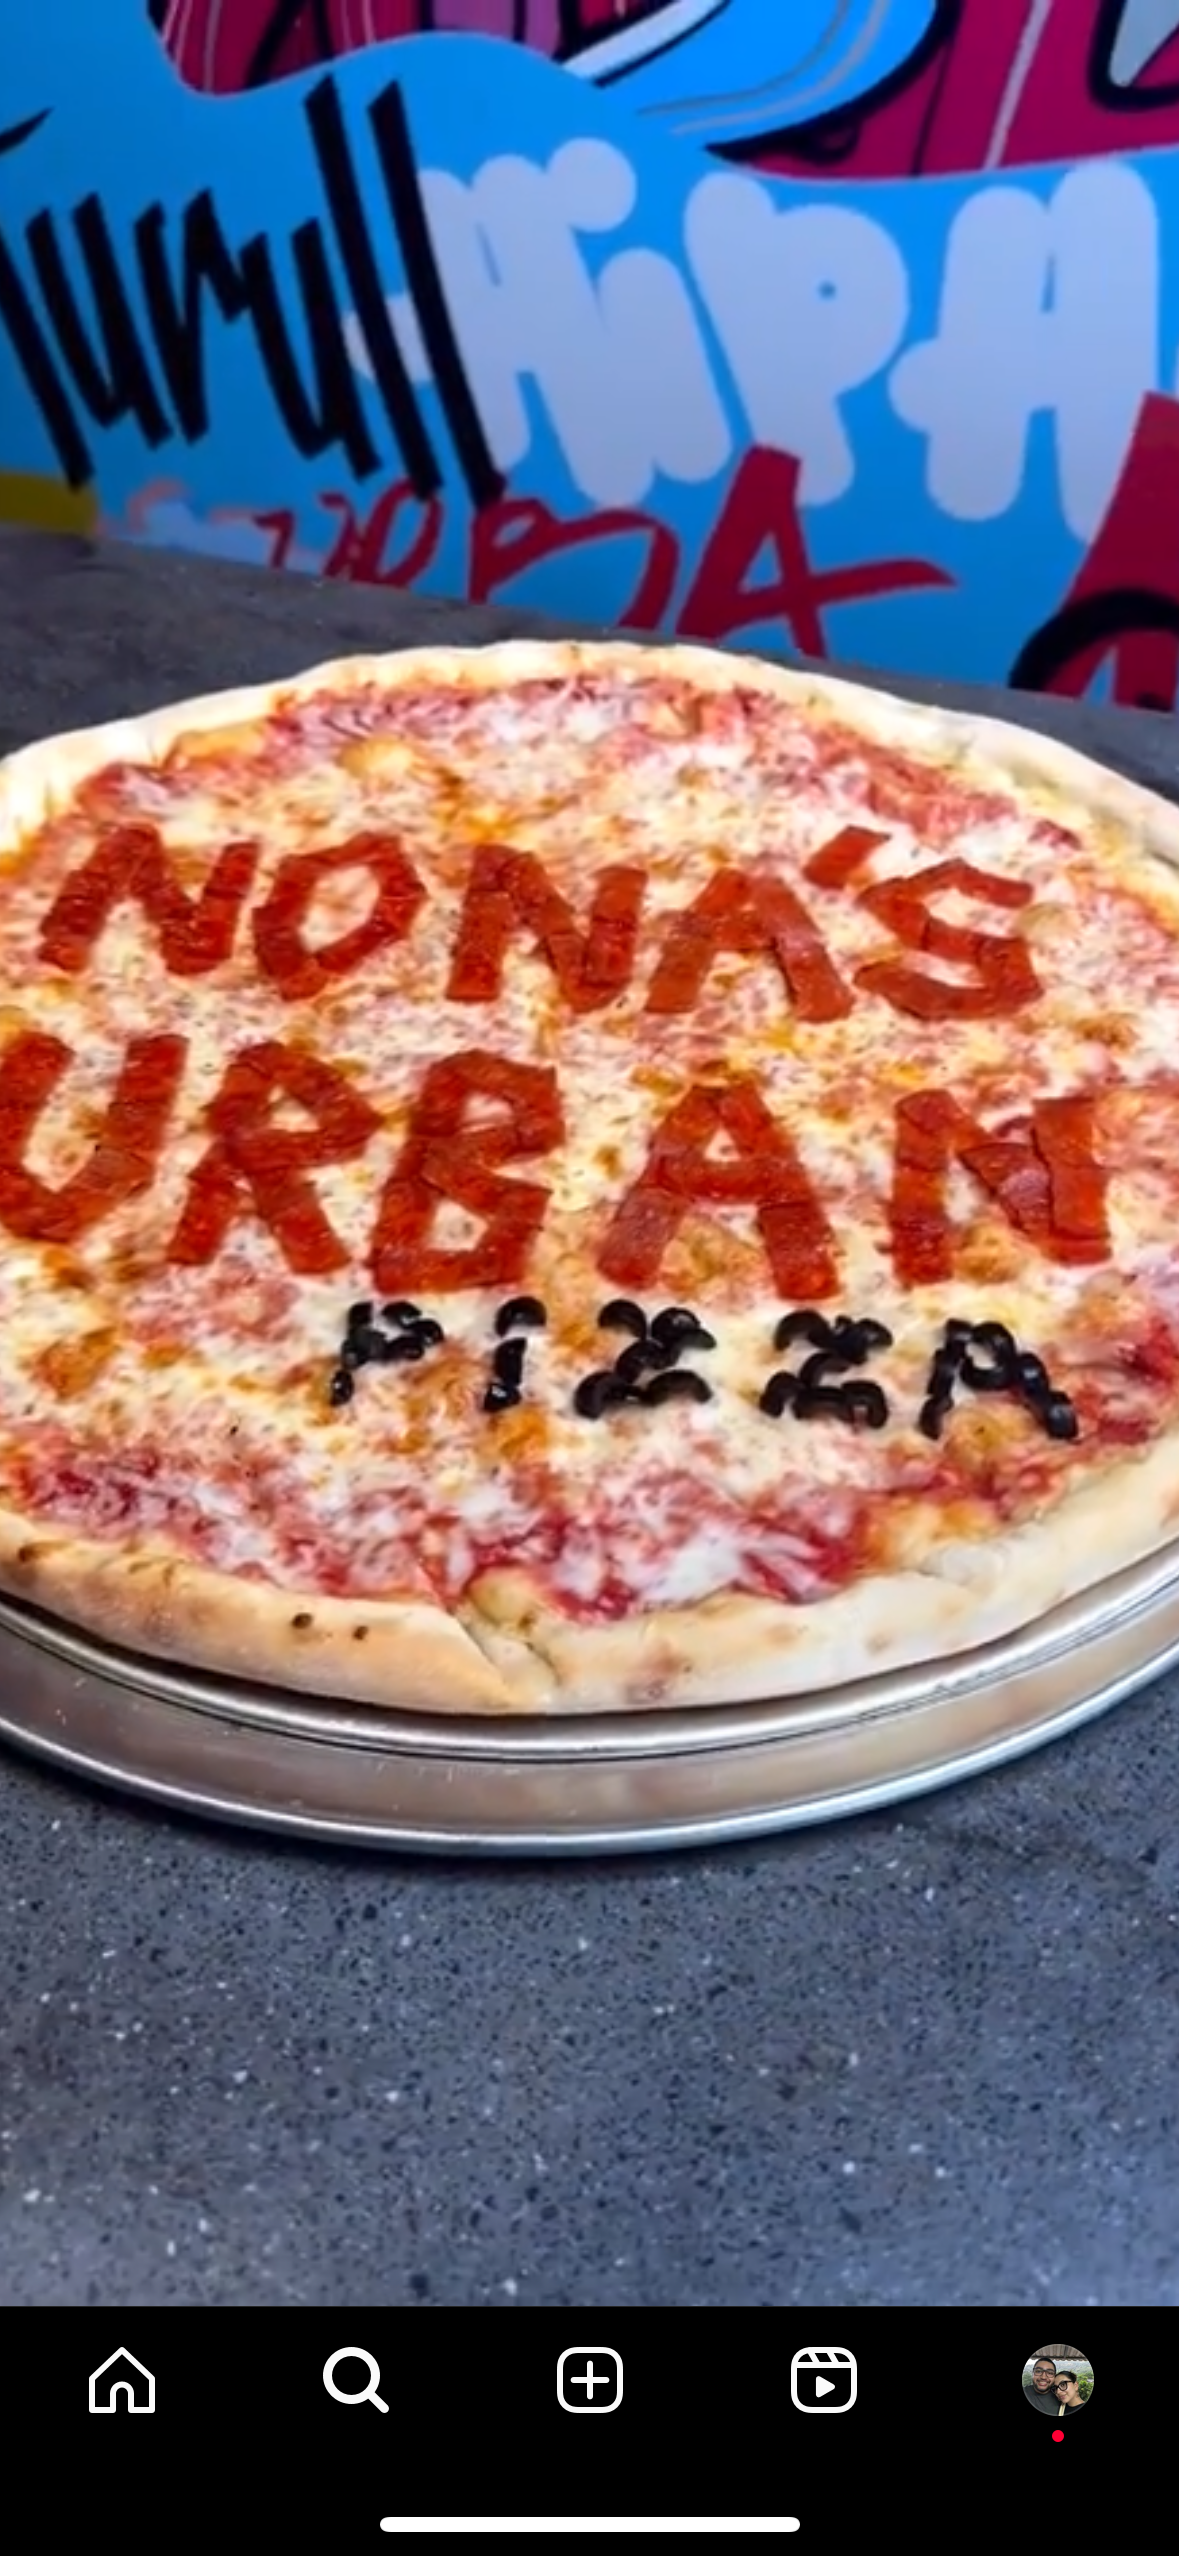 Have You Tried Nona’s Urban Pizza Yet?🍕